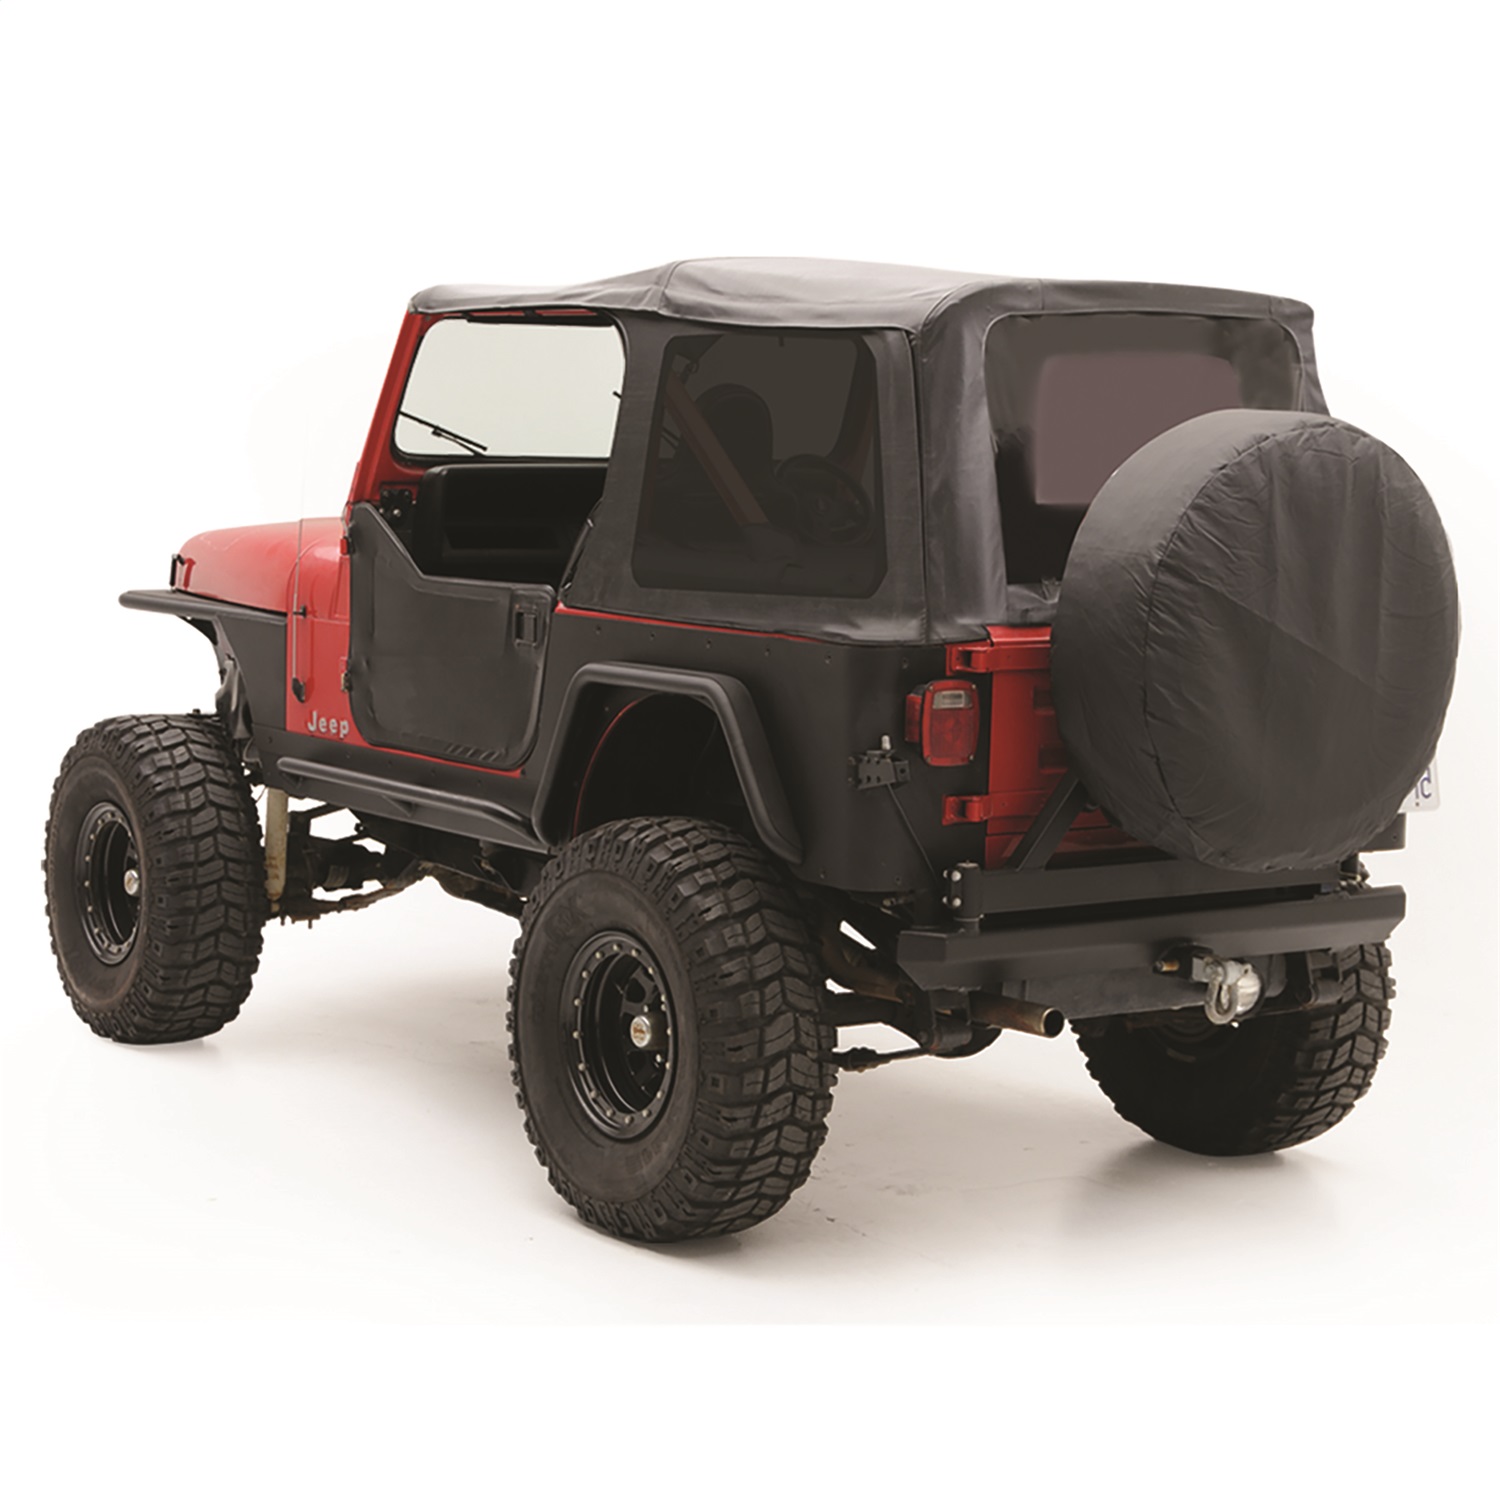 Smittybilt 9870215 Replacement Soft Top Fits 87-95 Wrangler (YJ)